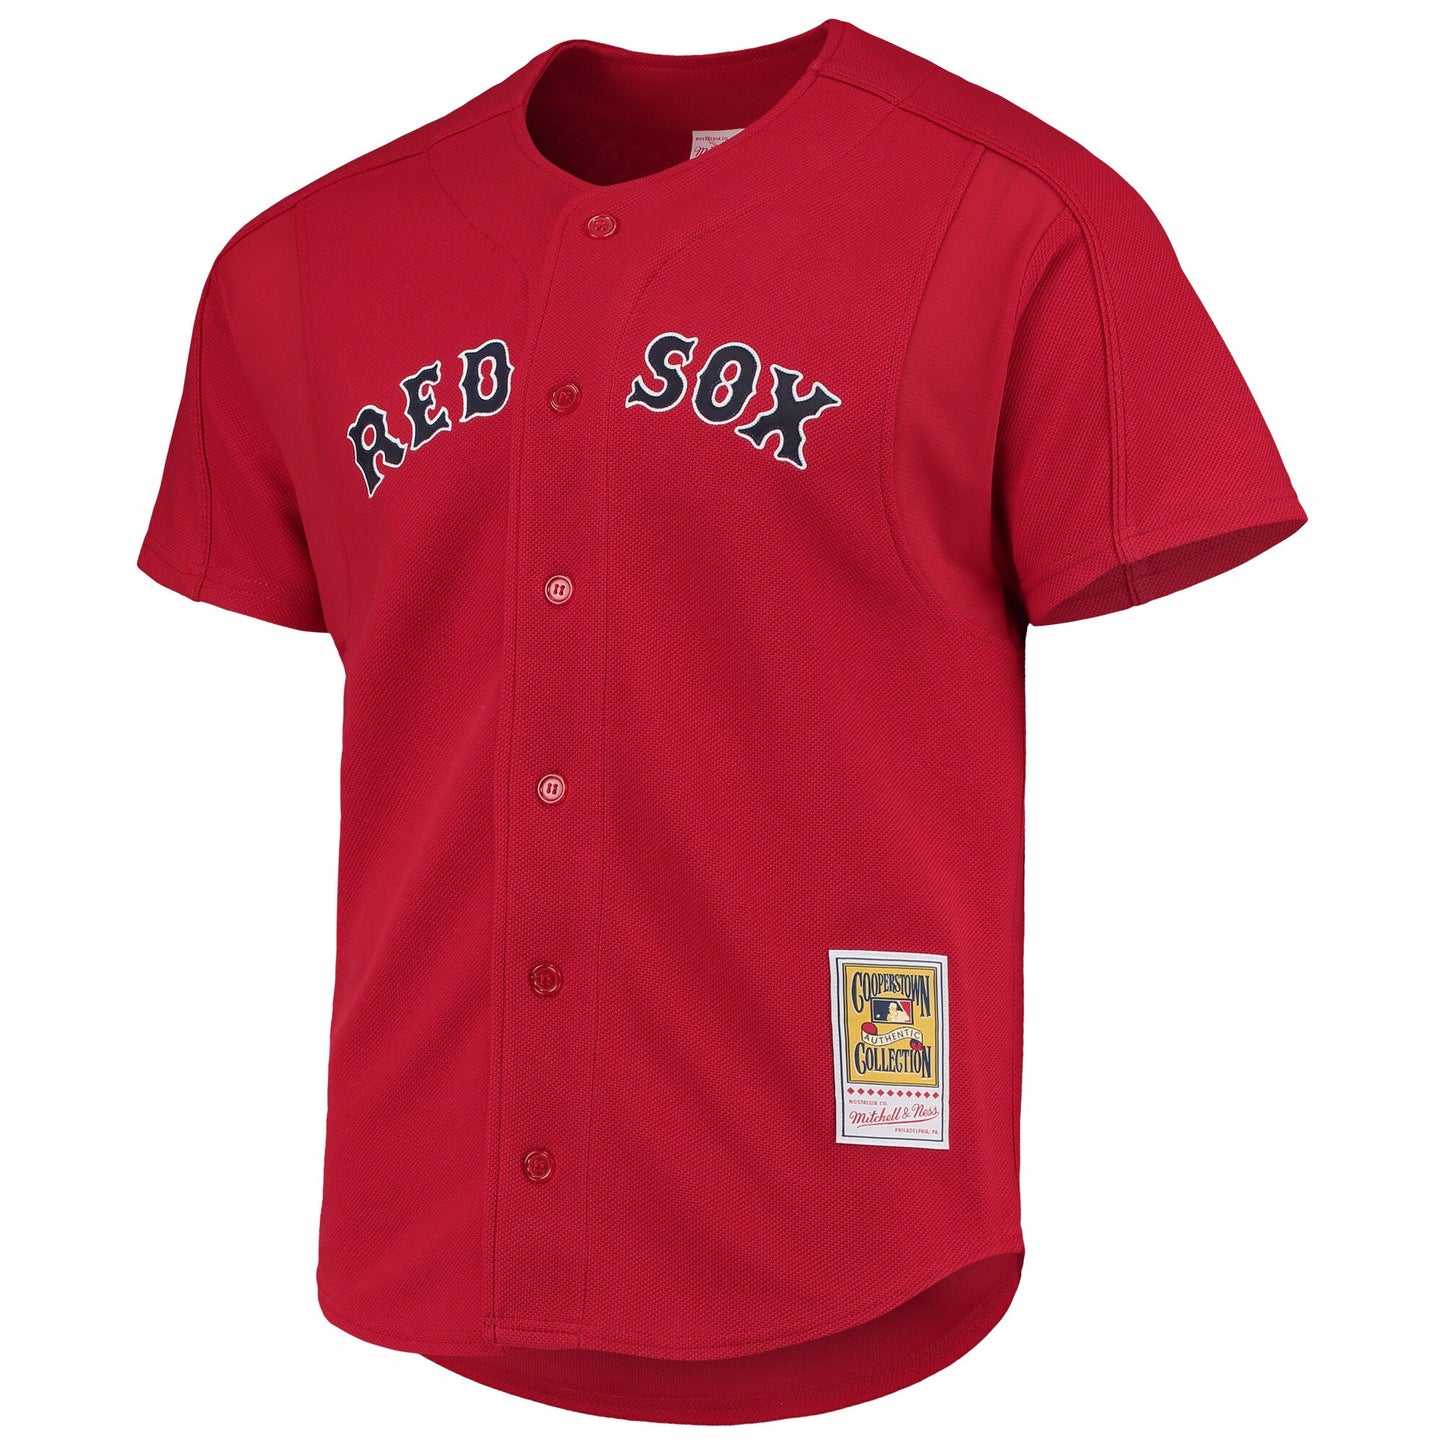 Men's David Ortiz Boston Red Sox 2004 Authentic Batting Practice Jersey By Mitchell And Ness